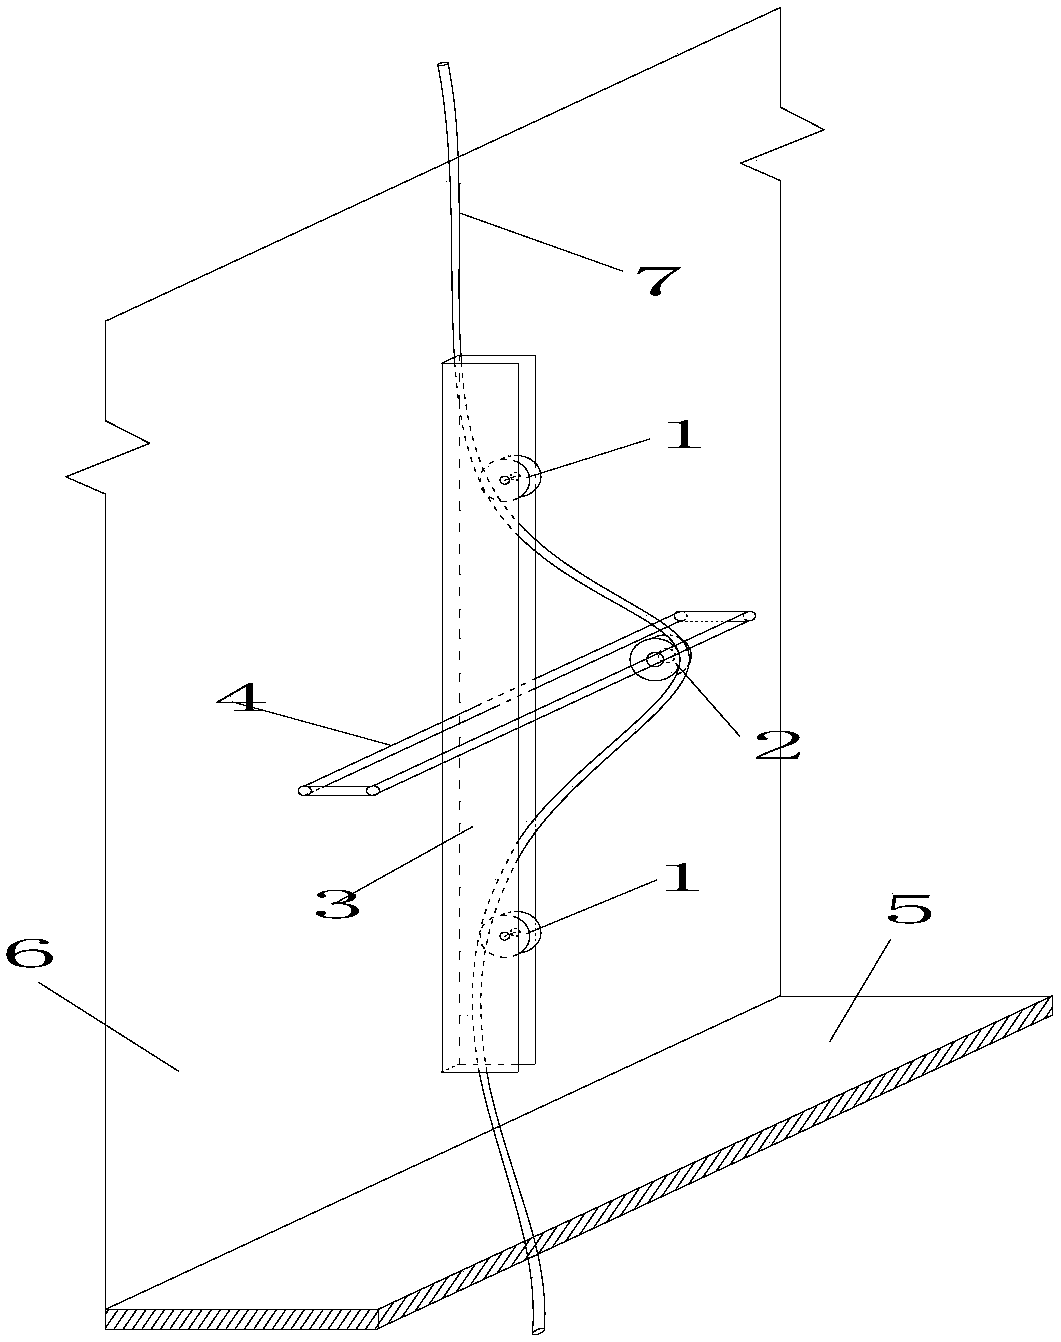 Construction method for vertically laying super-high-rise building cable